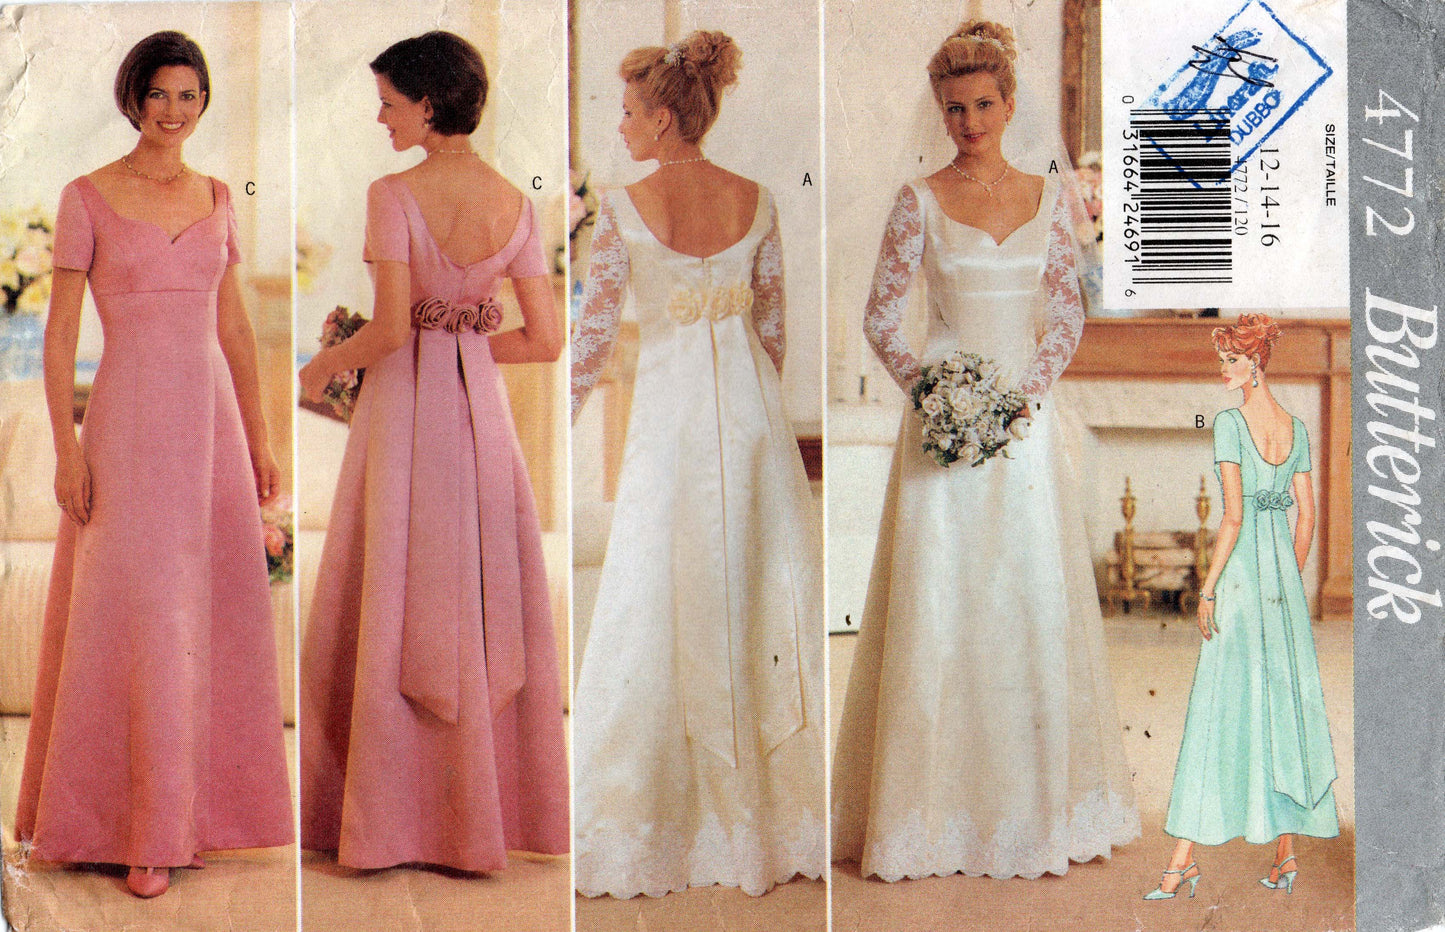 Butterick 4772 Womens High Waisted V Back Evening Wedding Bridesmaids Dress 1990s Vintage Sewing Pattern Size 12 - 16 UNCUT Factory Folded